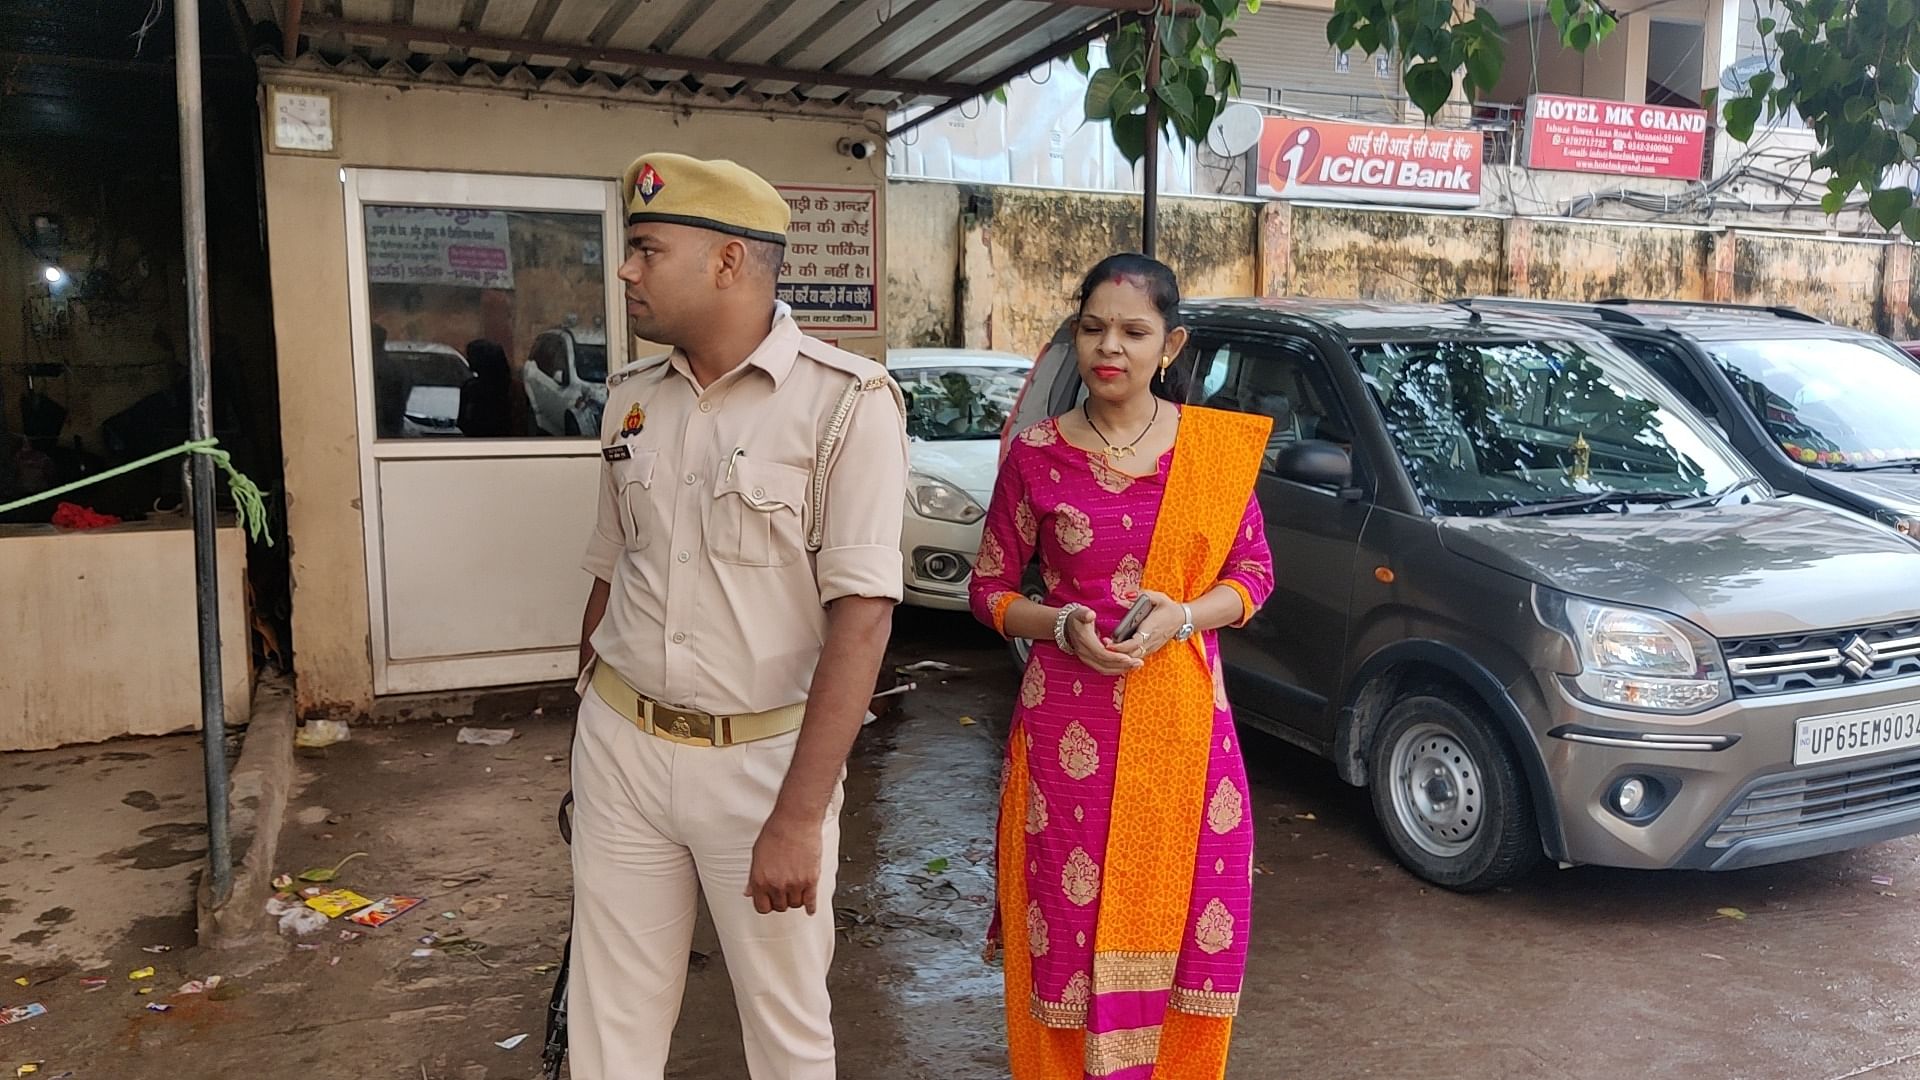 Petitioner Rakhi Singh on the way to Gyanvapi mosque to observe the ASI survey team. She has been provided security since she filed a case demanding praying rights inside the Gyanvapi mosque complex | Sonal Matharu, ThePrint